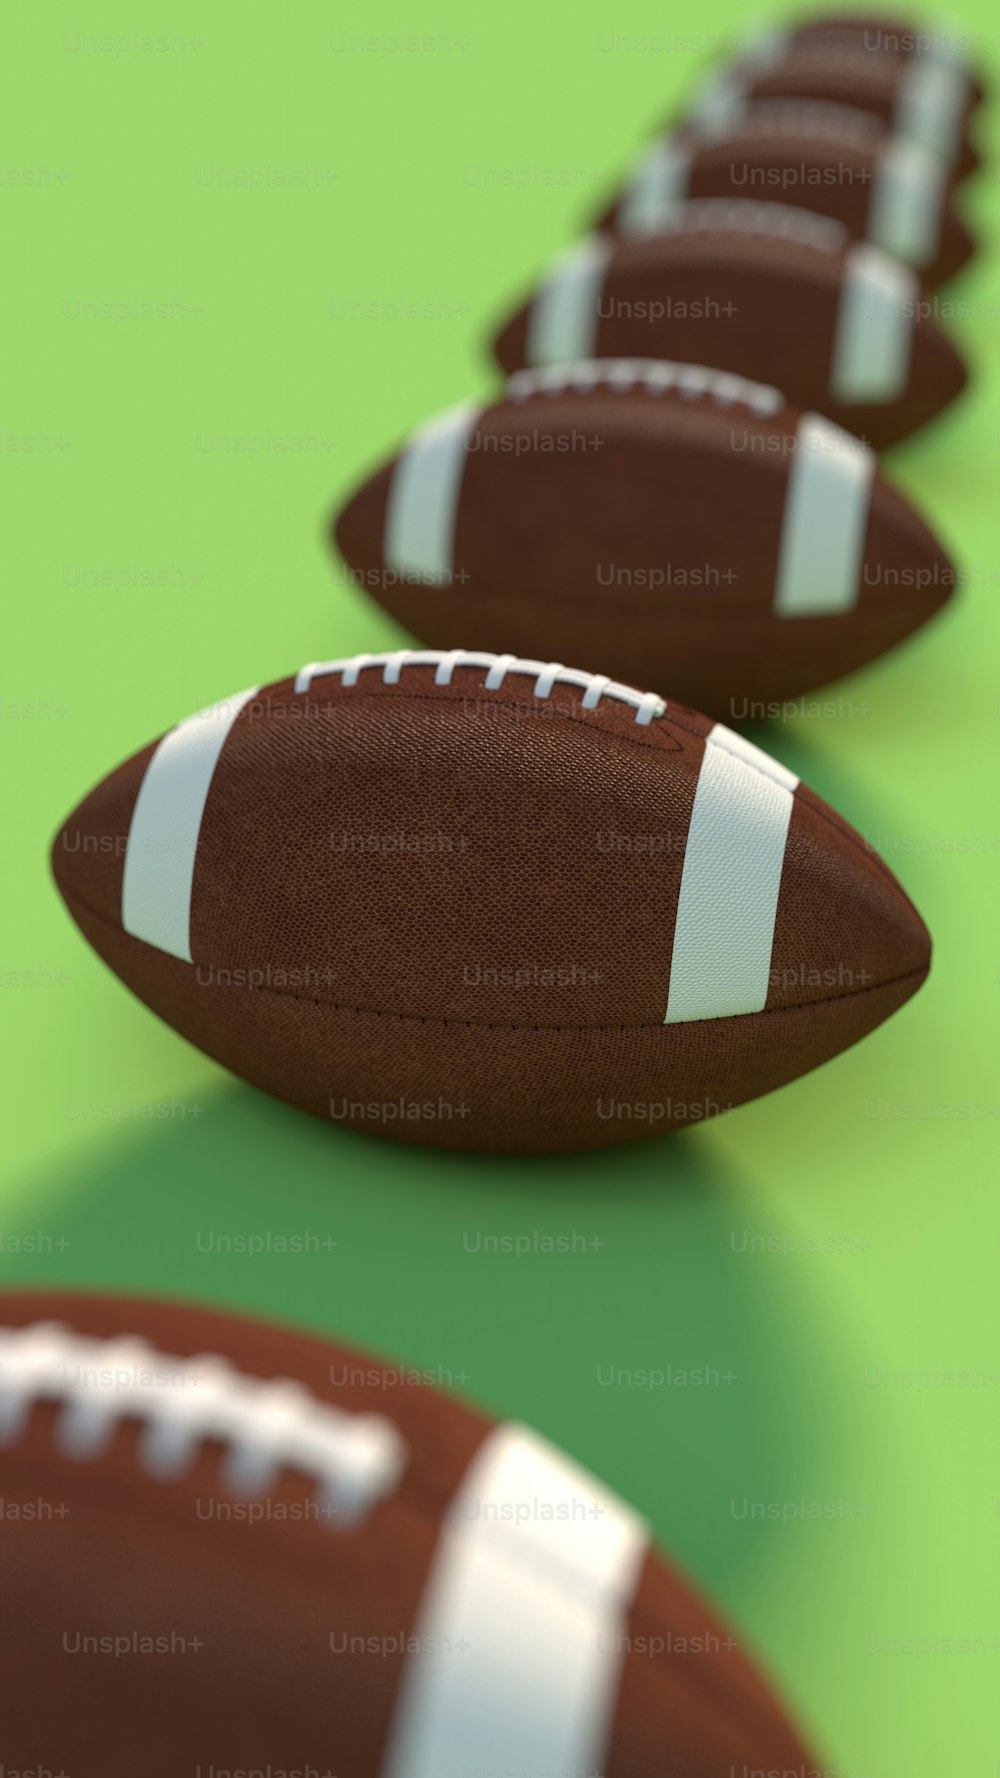 a row of footballs sitting on top of a green surface